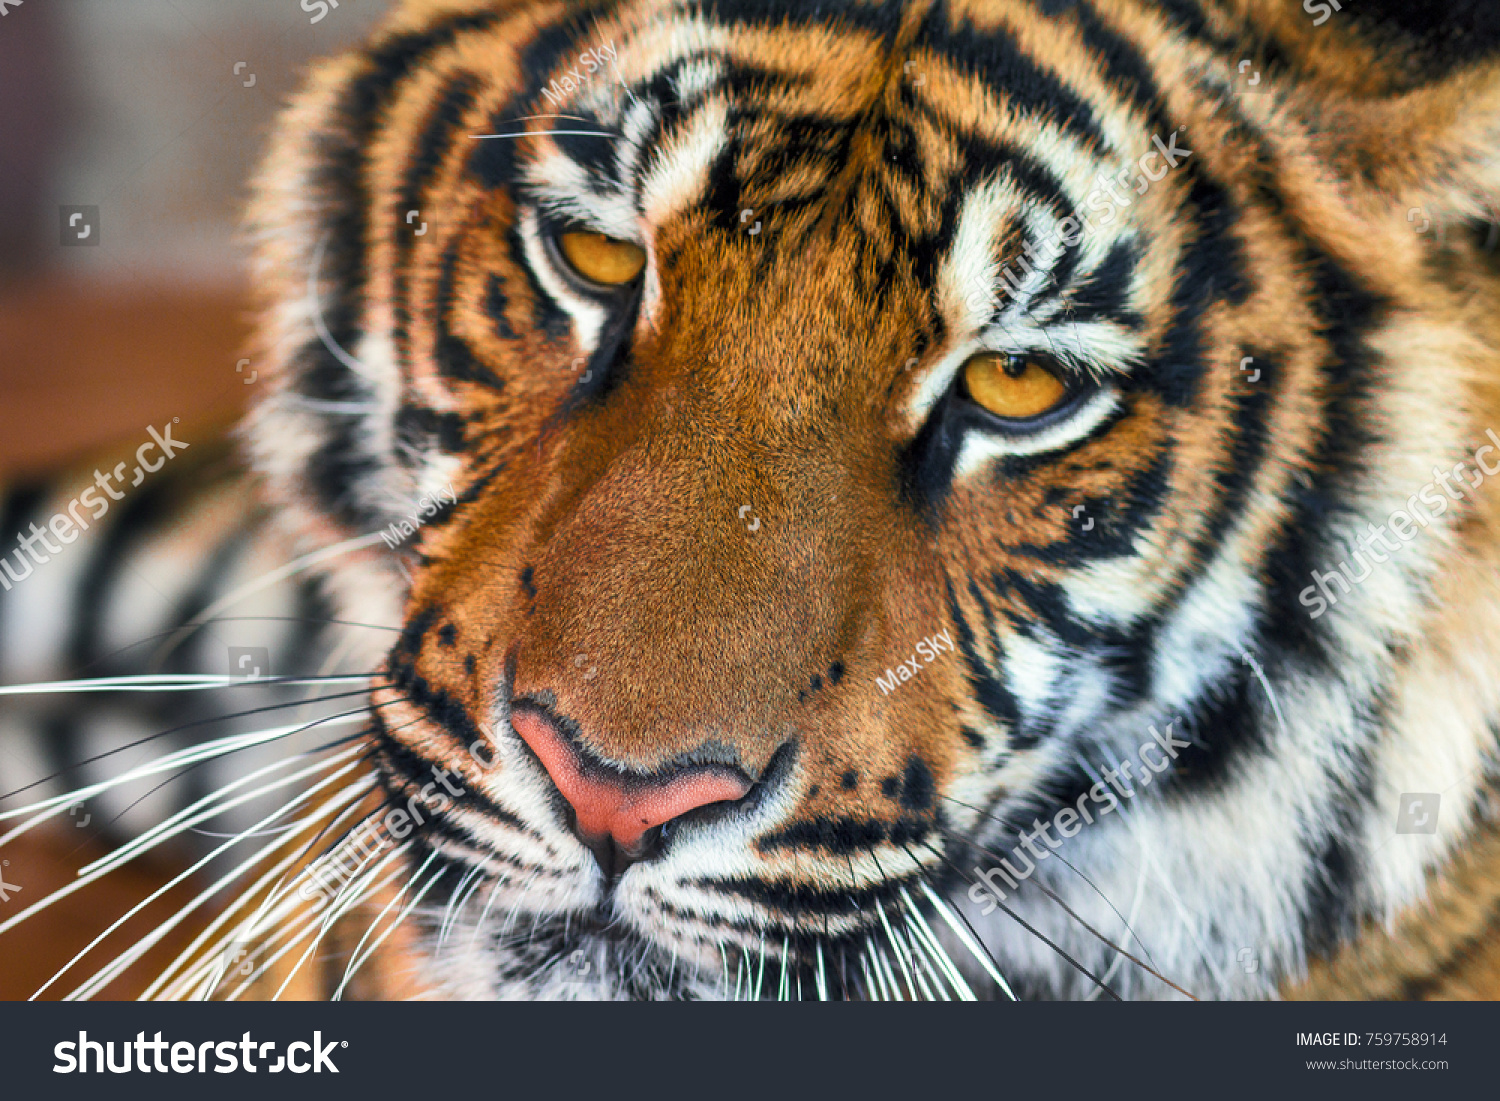 The Indochinese tiger. Close-up #759758914